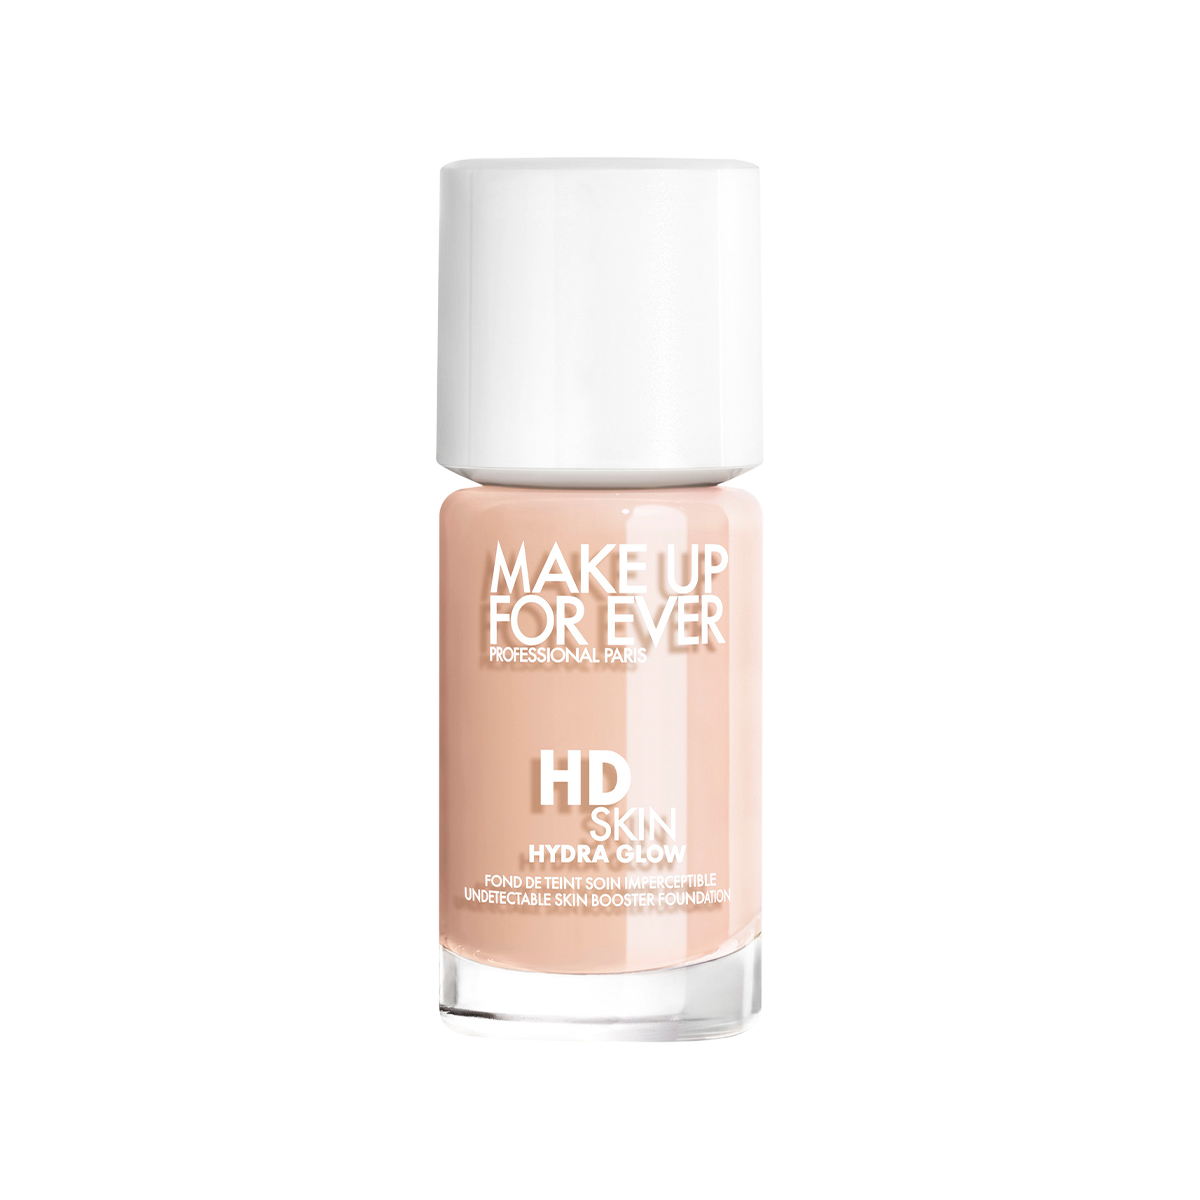 Shop Make Up For Ever Hd Skin Hydra Glow In Porcelain